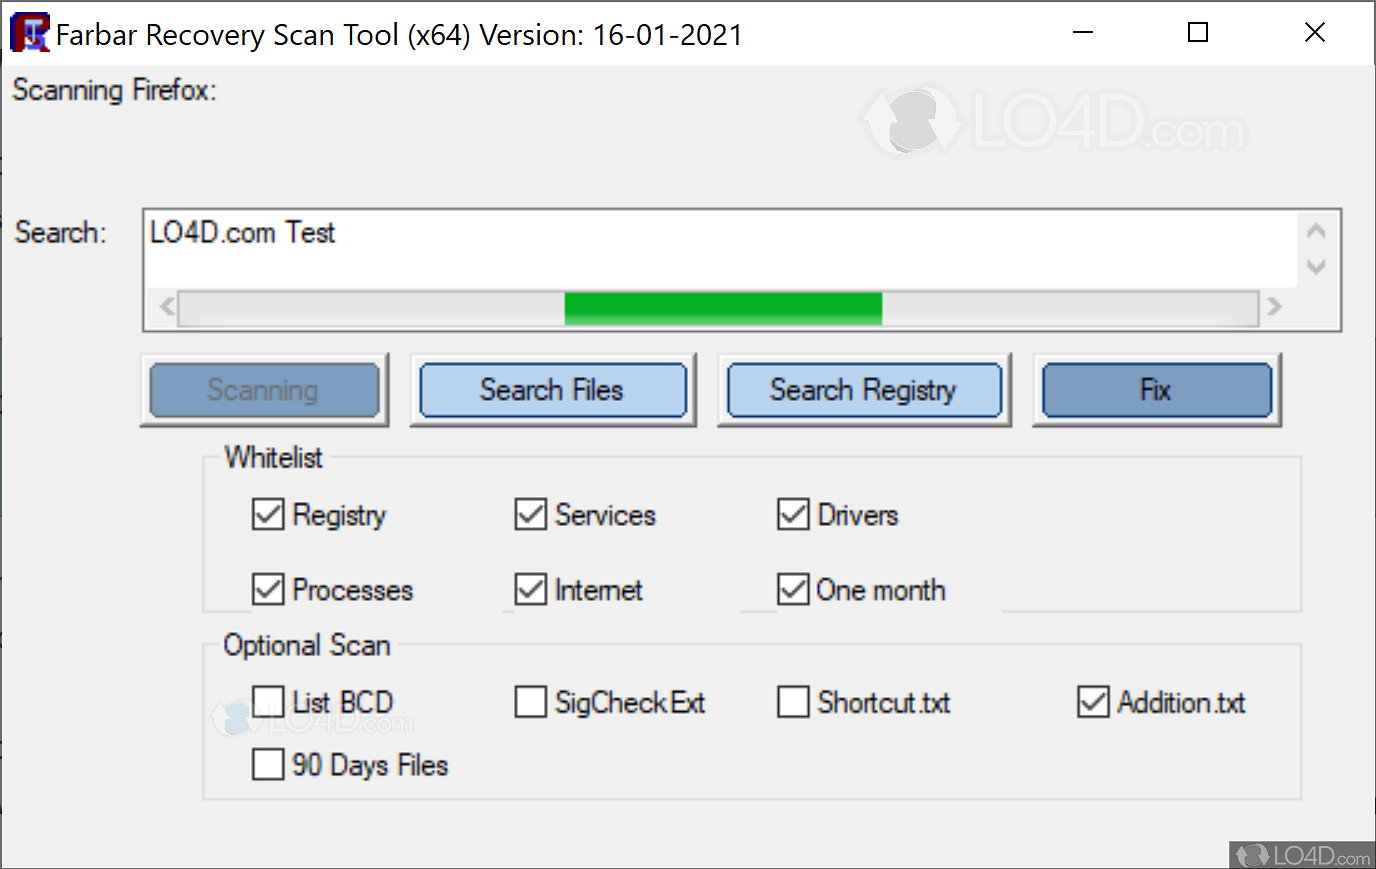 hpw to read farbar recovery scan tool